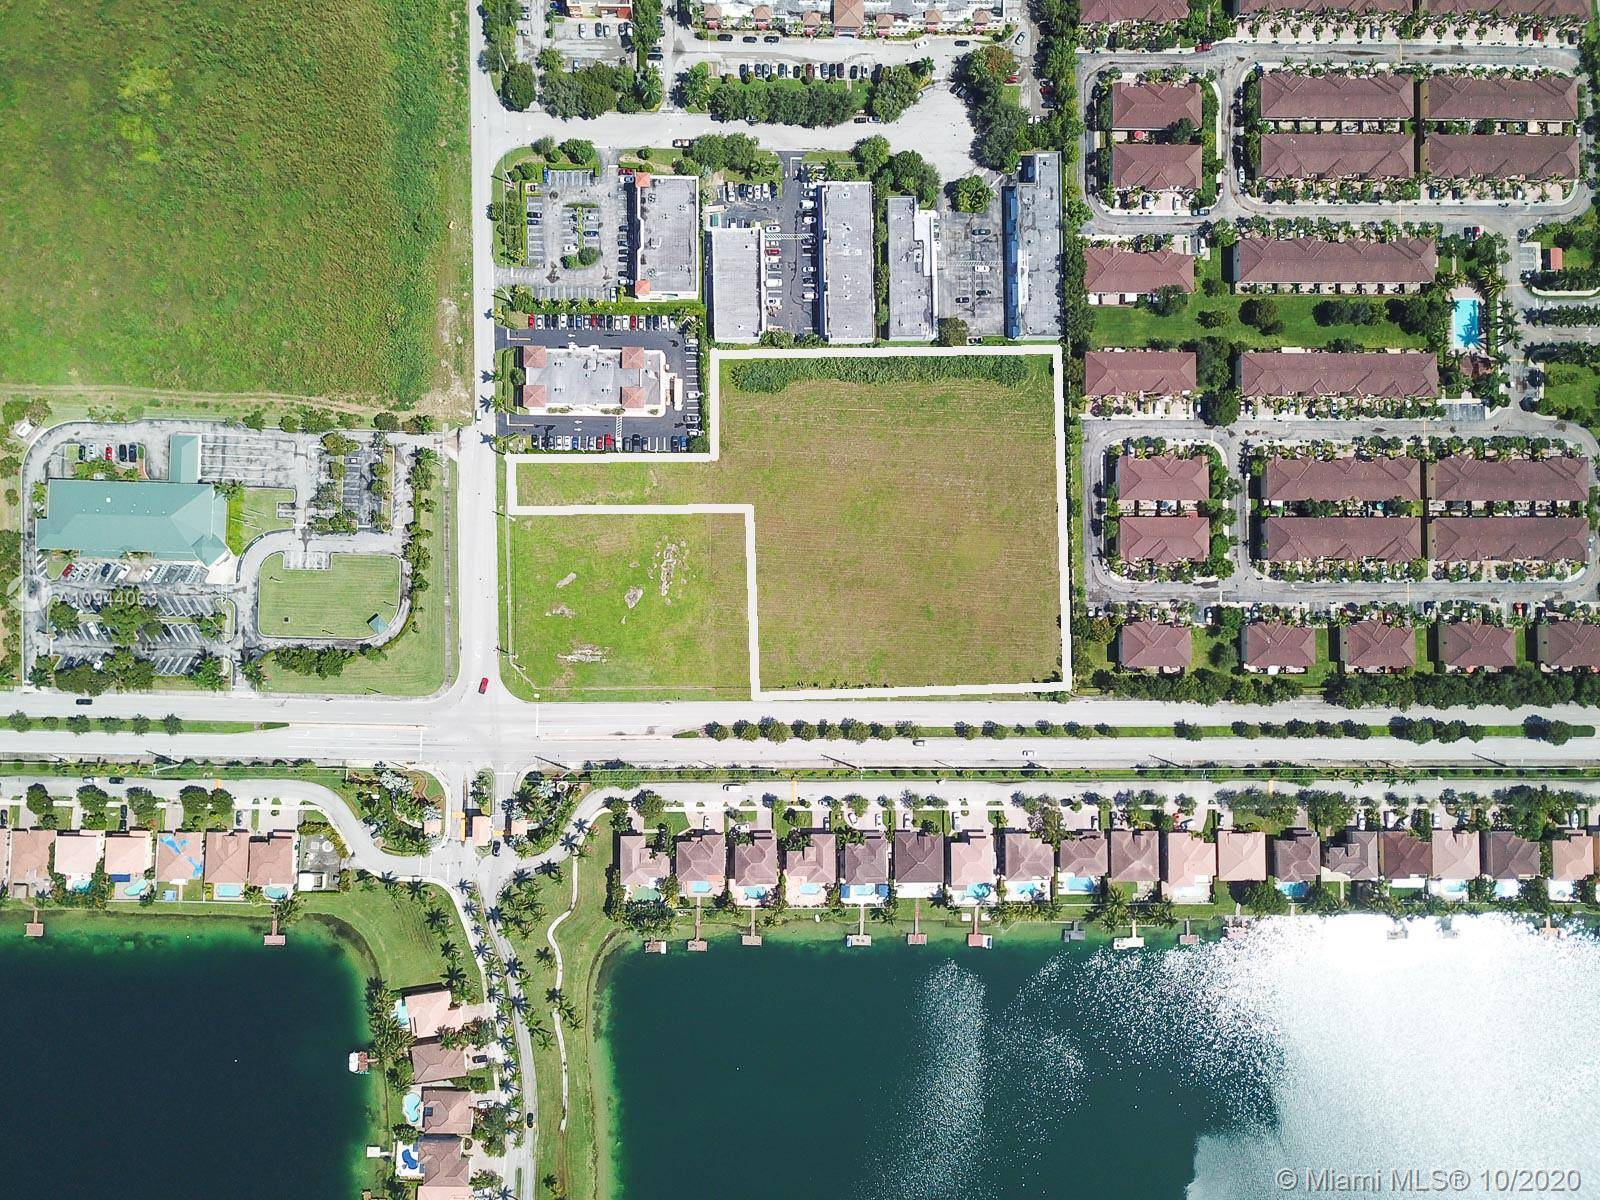 Almost 4 acres of land in the heart of the Three Lakes Area of Kendall.